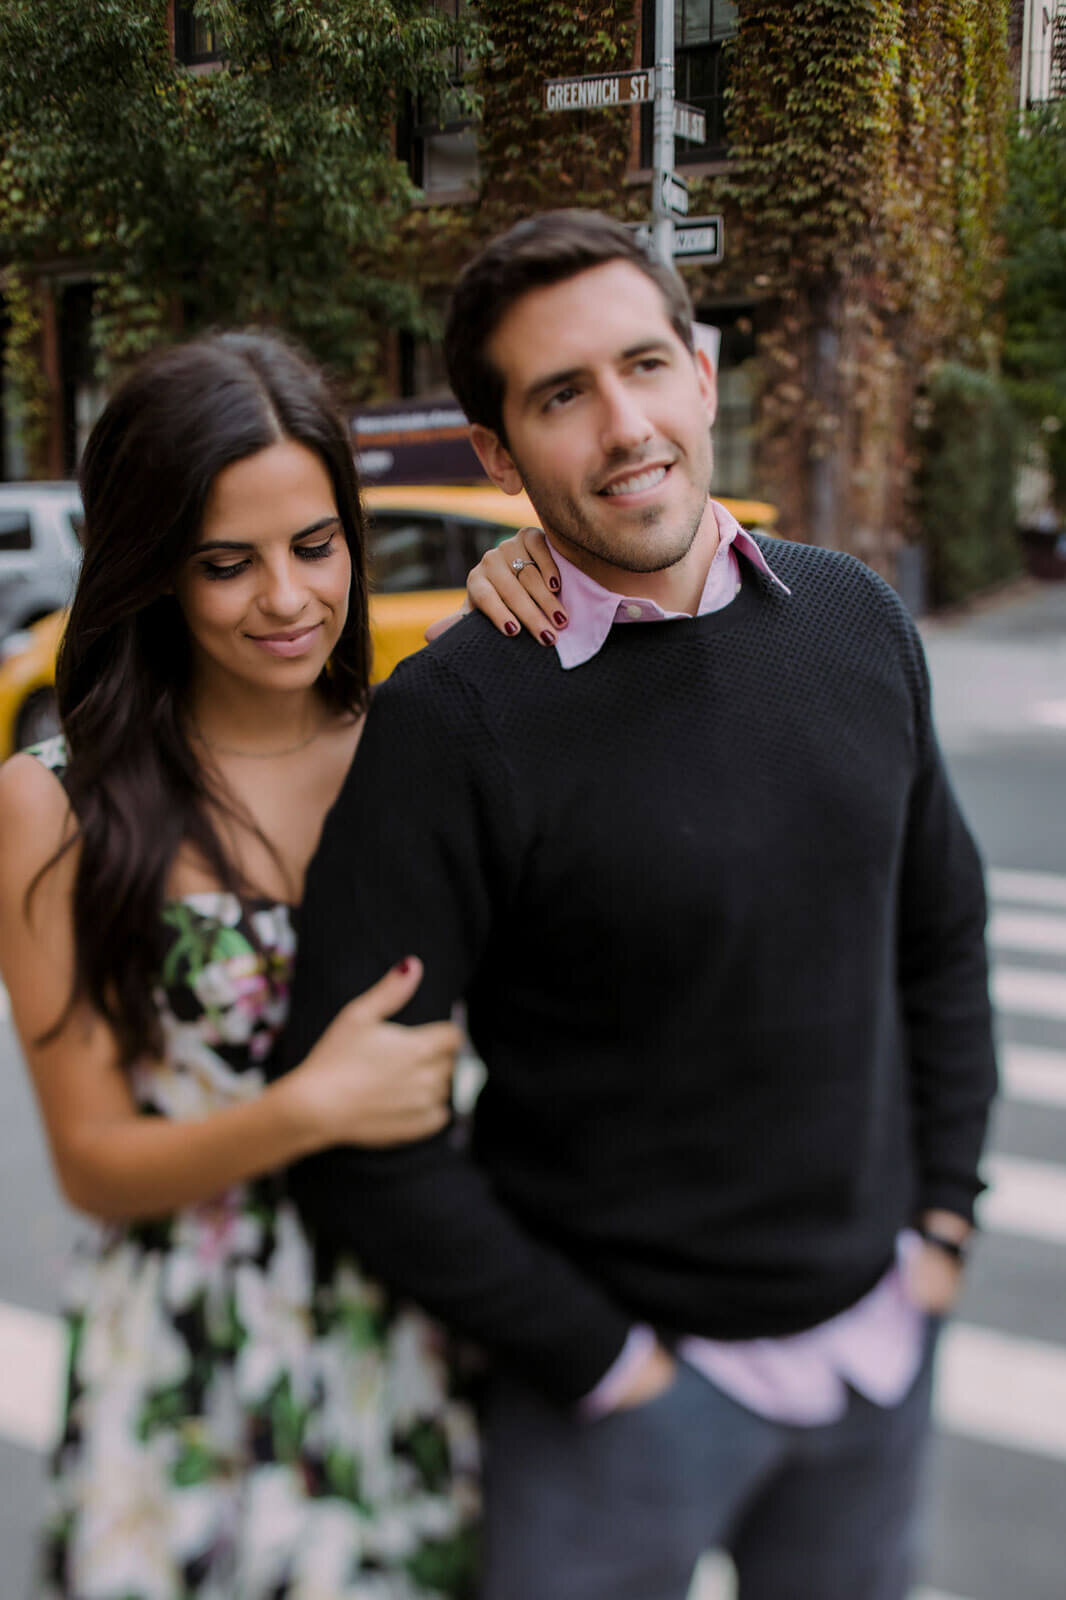 The engaged couple is at West Village, Manhattan, NYC, with an ivy-covered building in the background. Image by Jenny Fu Studio.